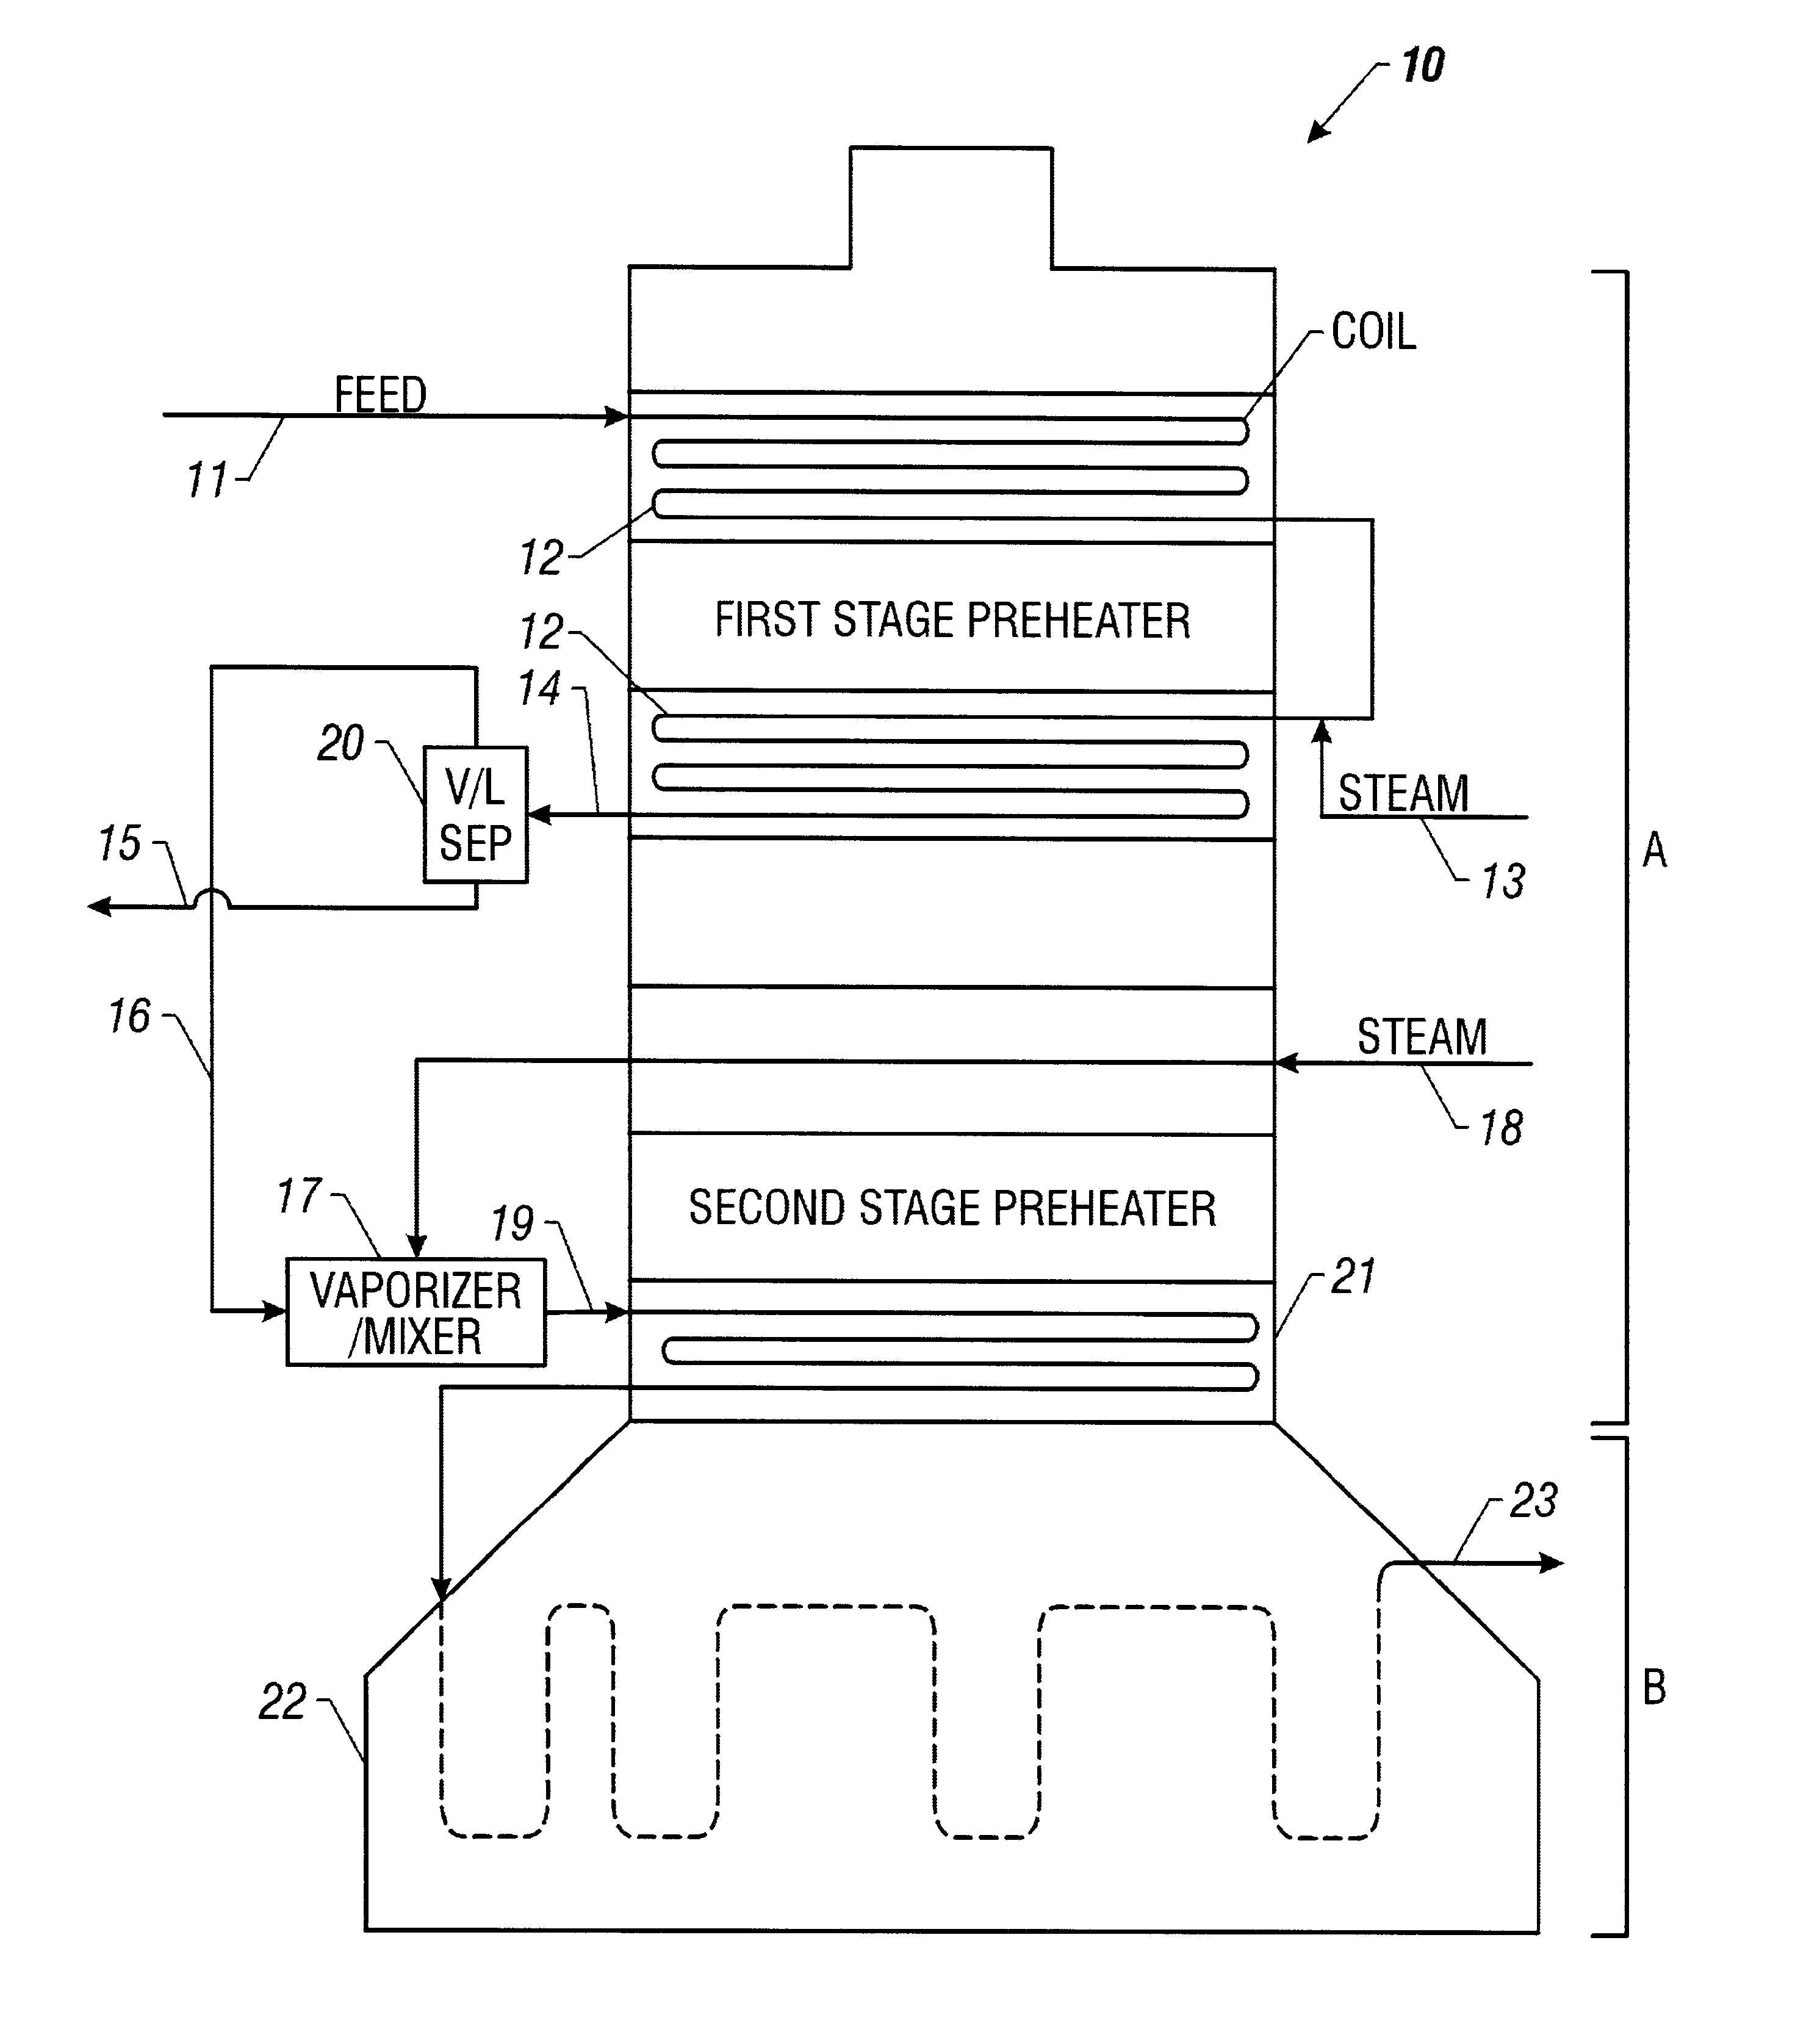 Thermal cracking of crude oil and crude oil fractions containing pitch in an ethylene furnace